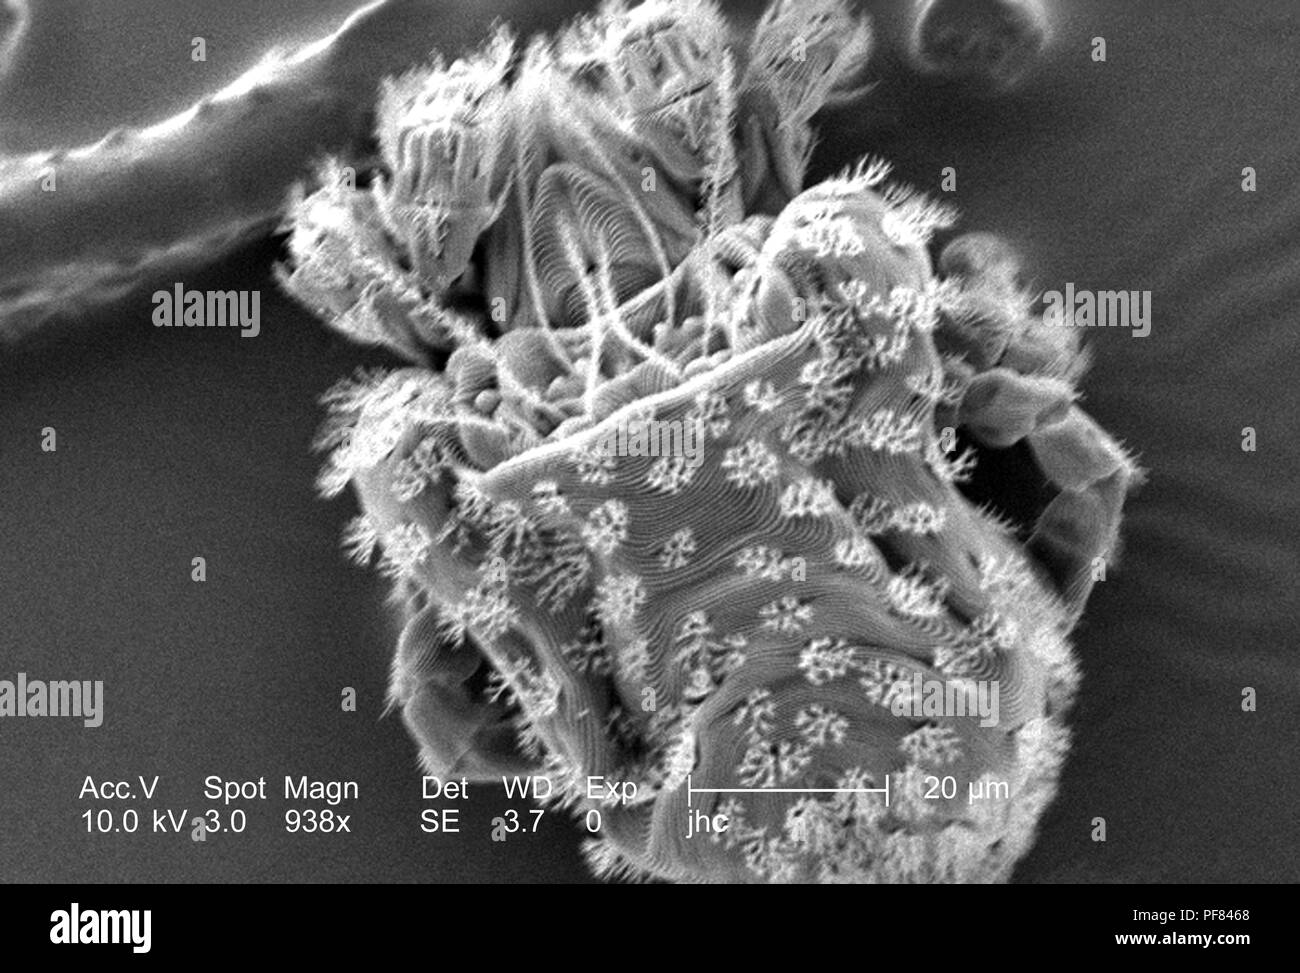 Presence of numbers fungivorous soil and leaf-litter/moss mites from the Family Nanorchestidae found on the lizard skin, revealed in the 938x magnified scanning electron microscopic (SEM) image, 2006. Image courtesy Centers for Disease Control (CDC) / William L. Nicholson, Ph.D. Cal Welbourn, Ph.D. Gary R. Mullen. () Stock Photo